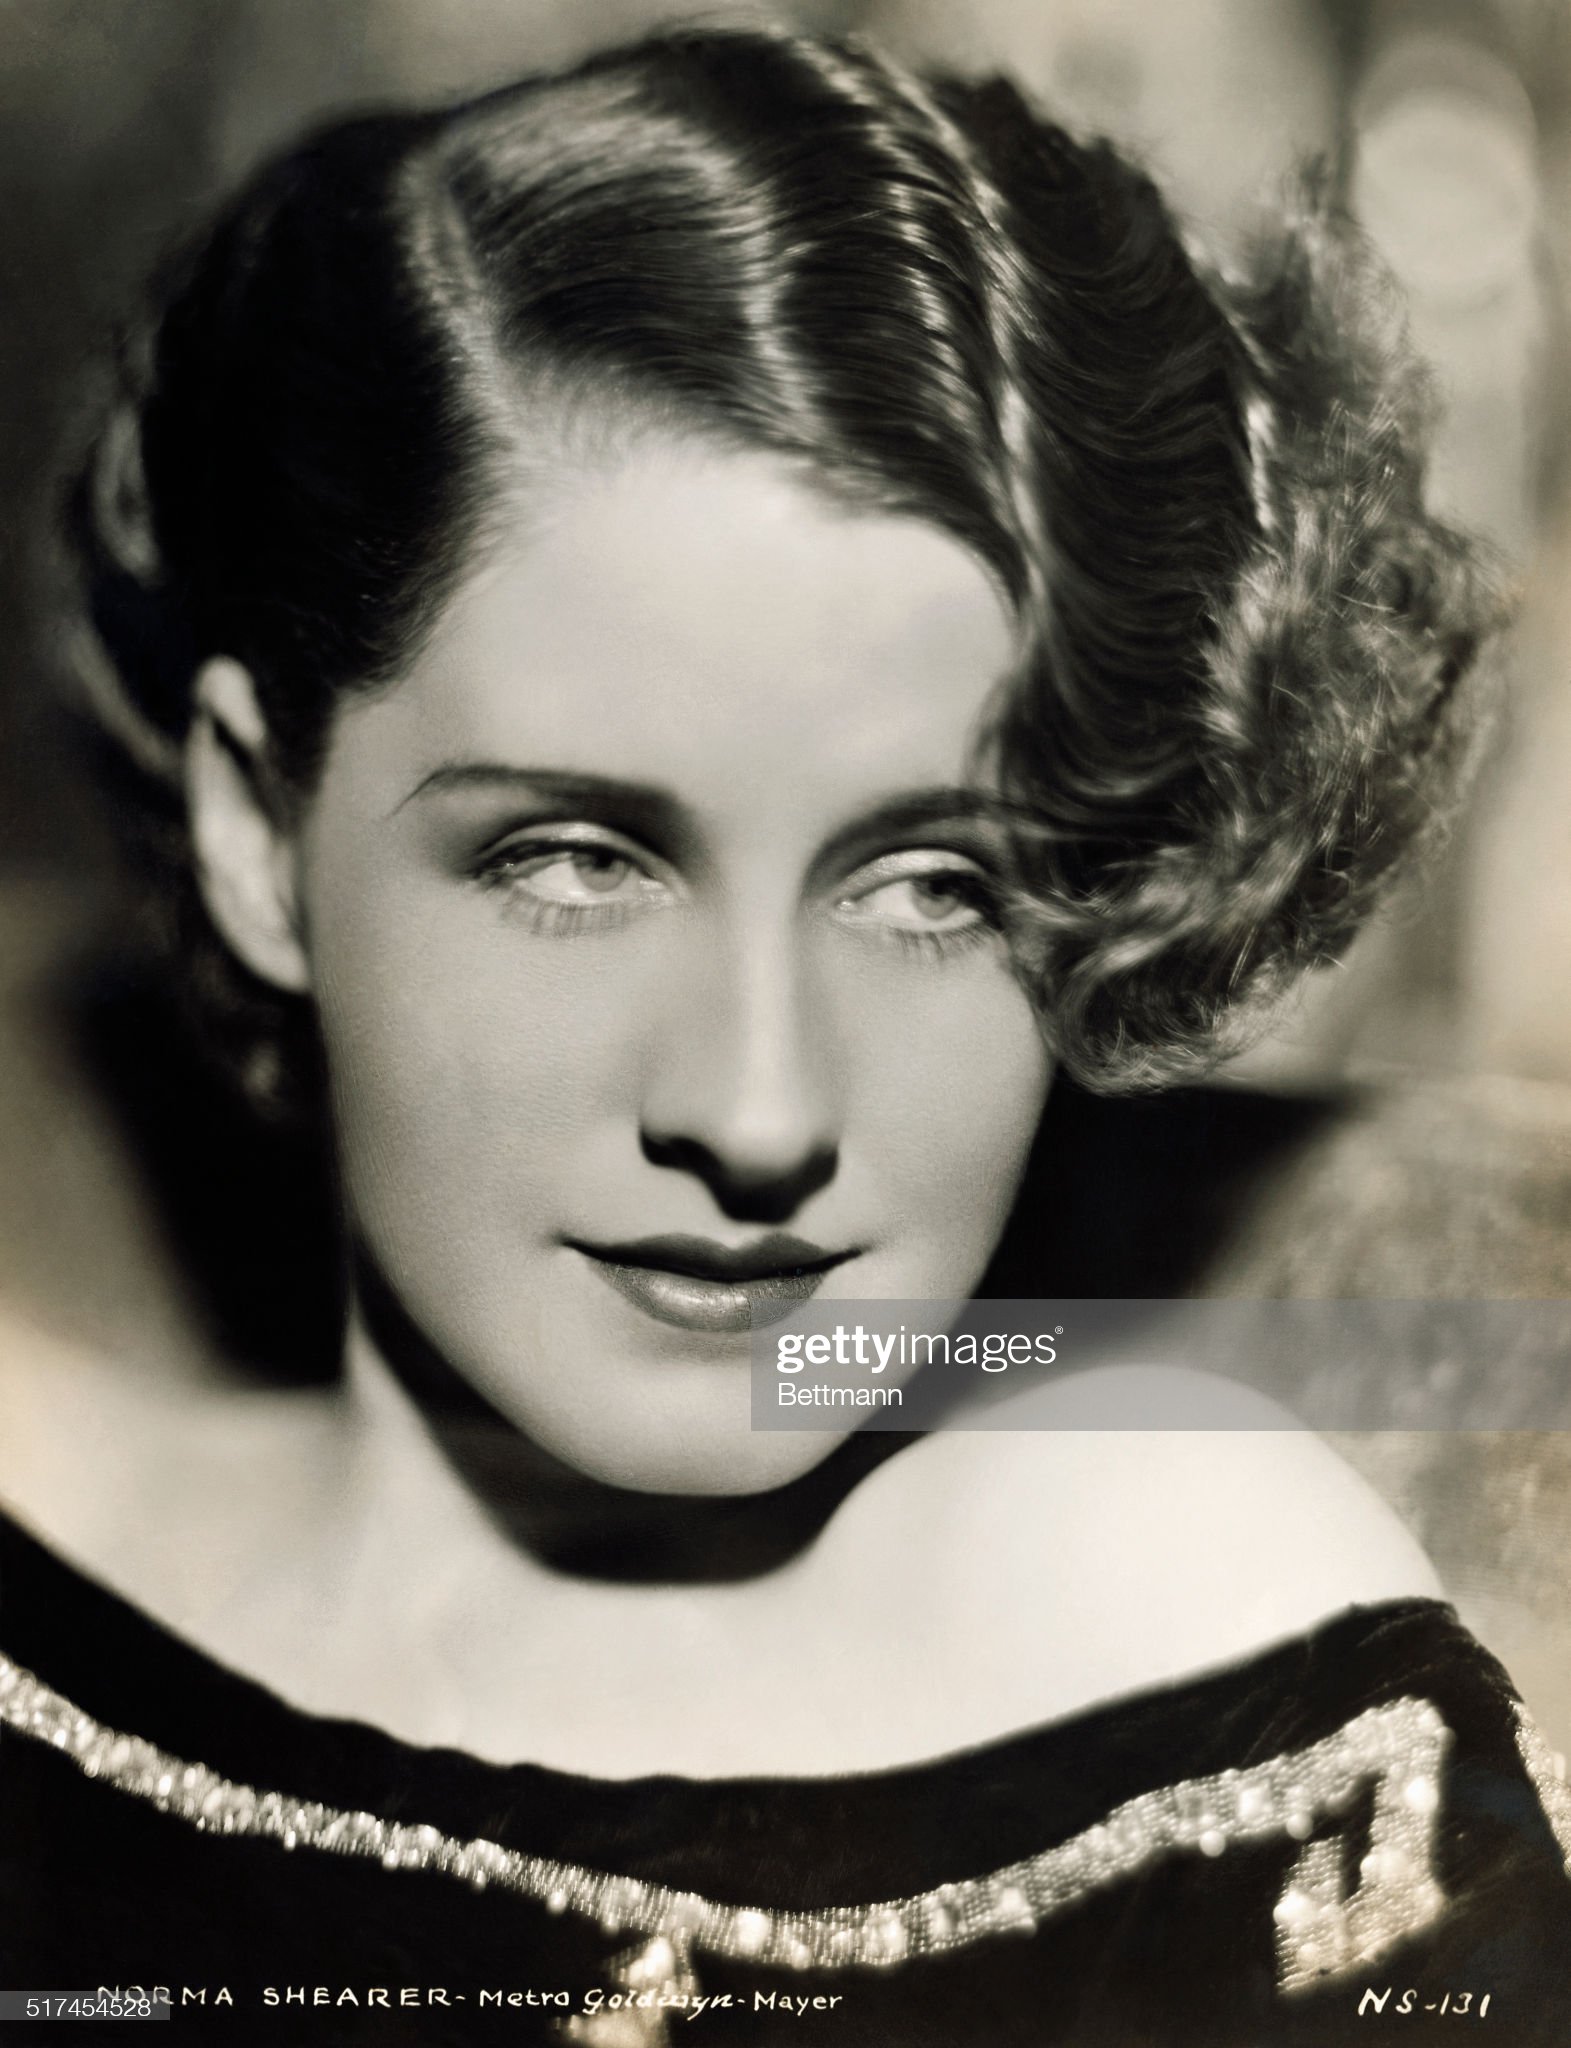 Norma Shearer is seen here, she is an American actress. 